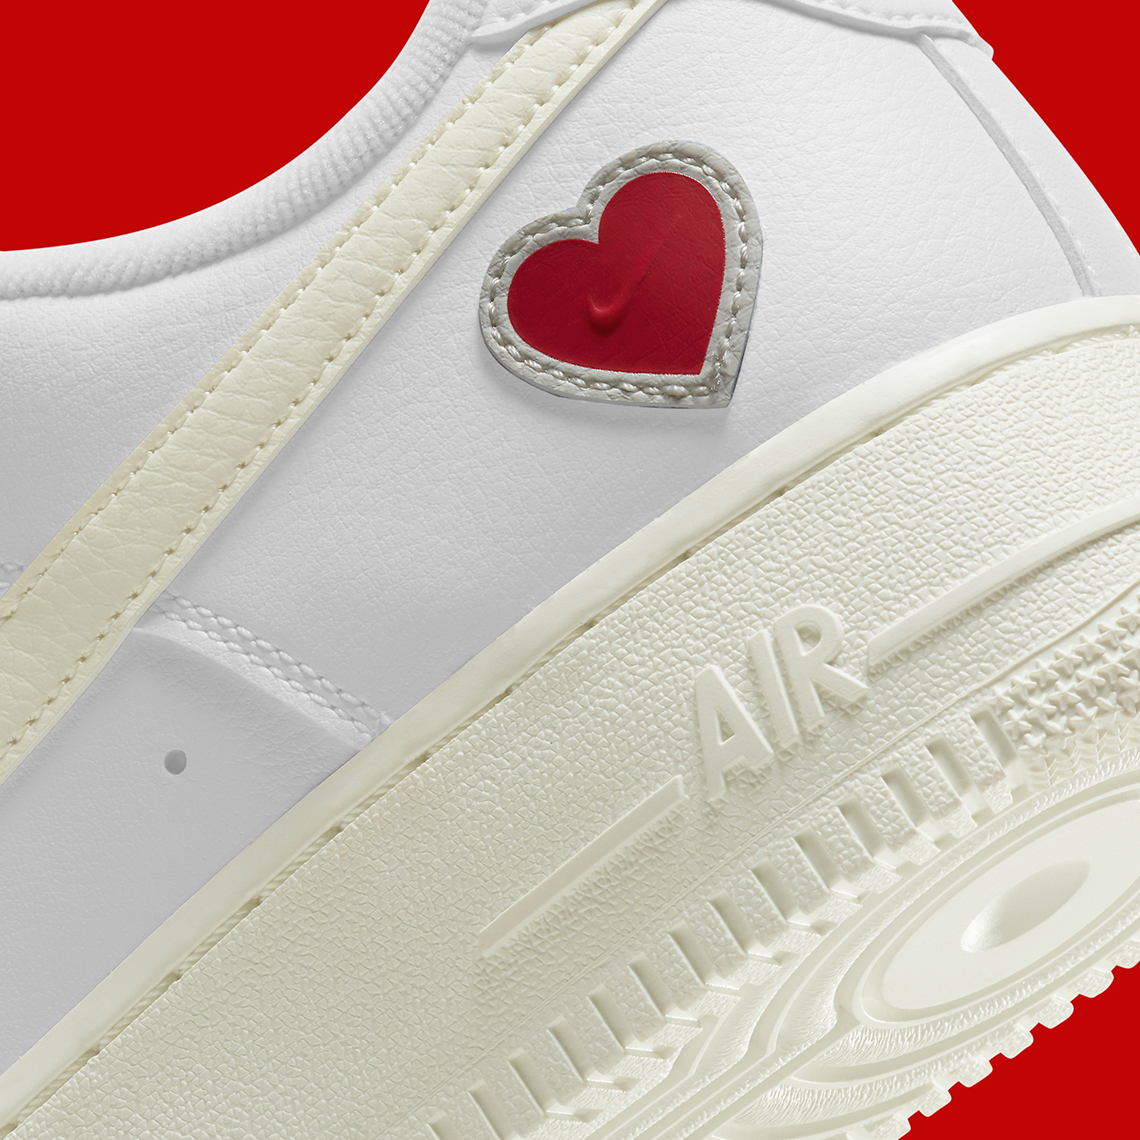 Nike Air Force 1 Valentines day 2021